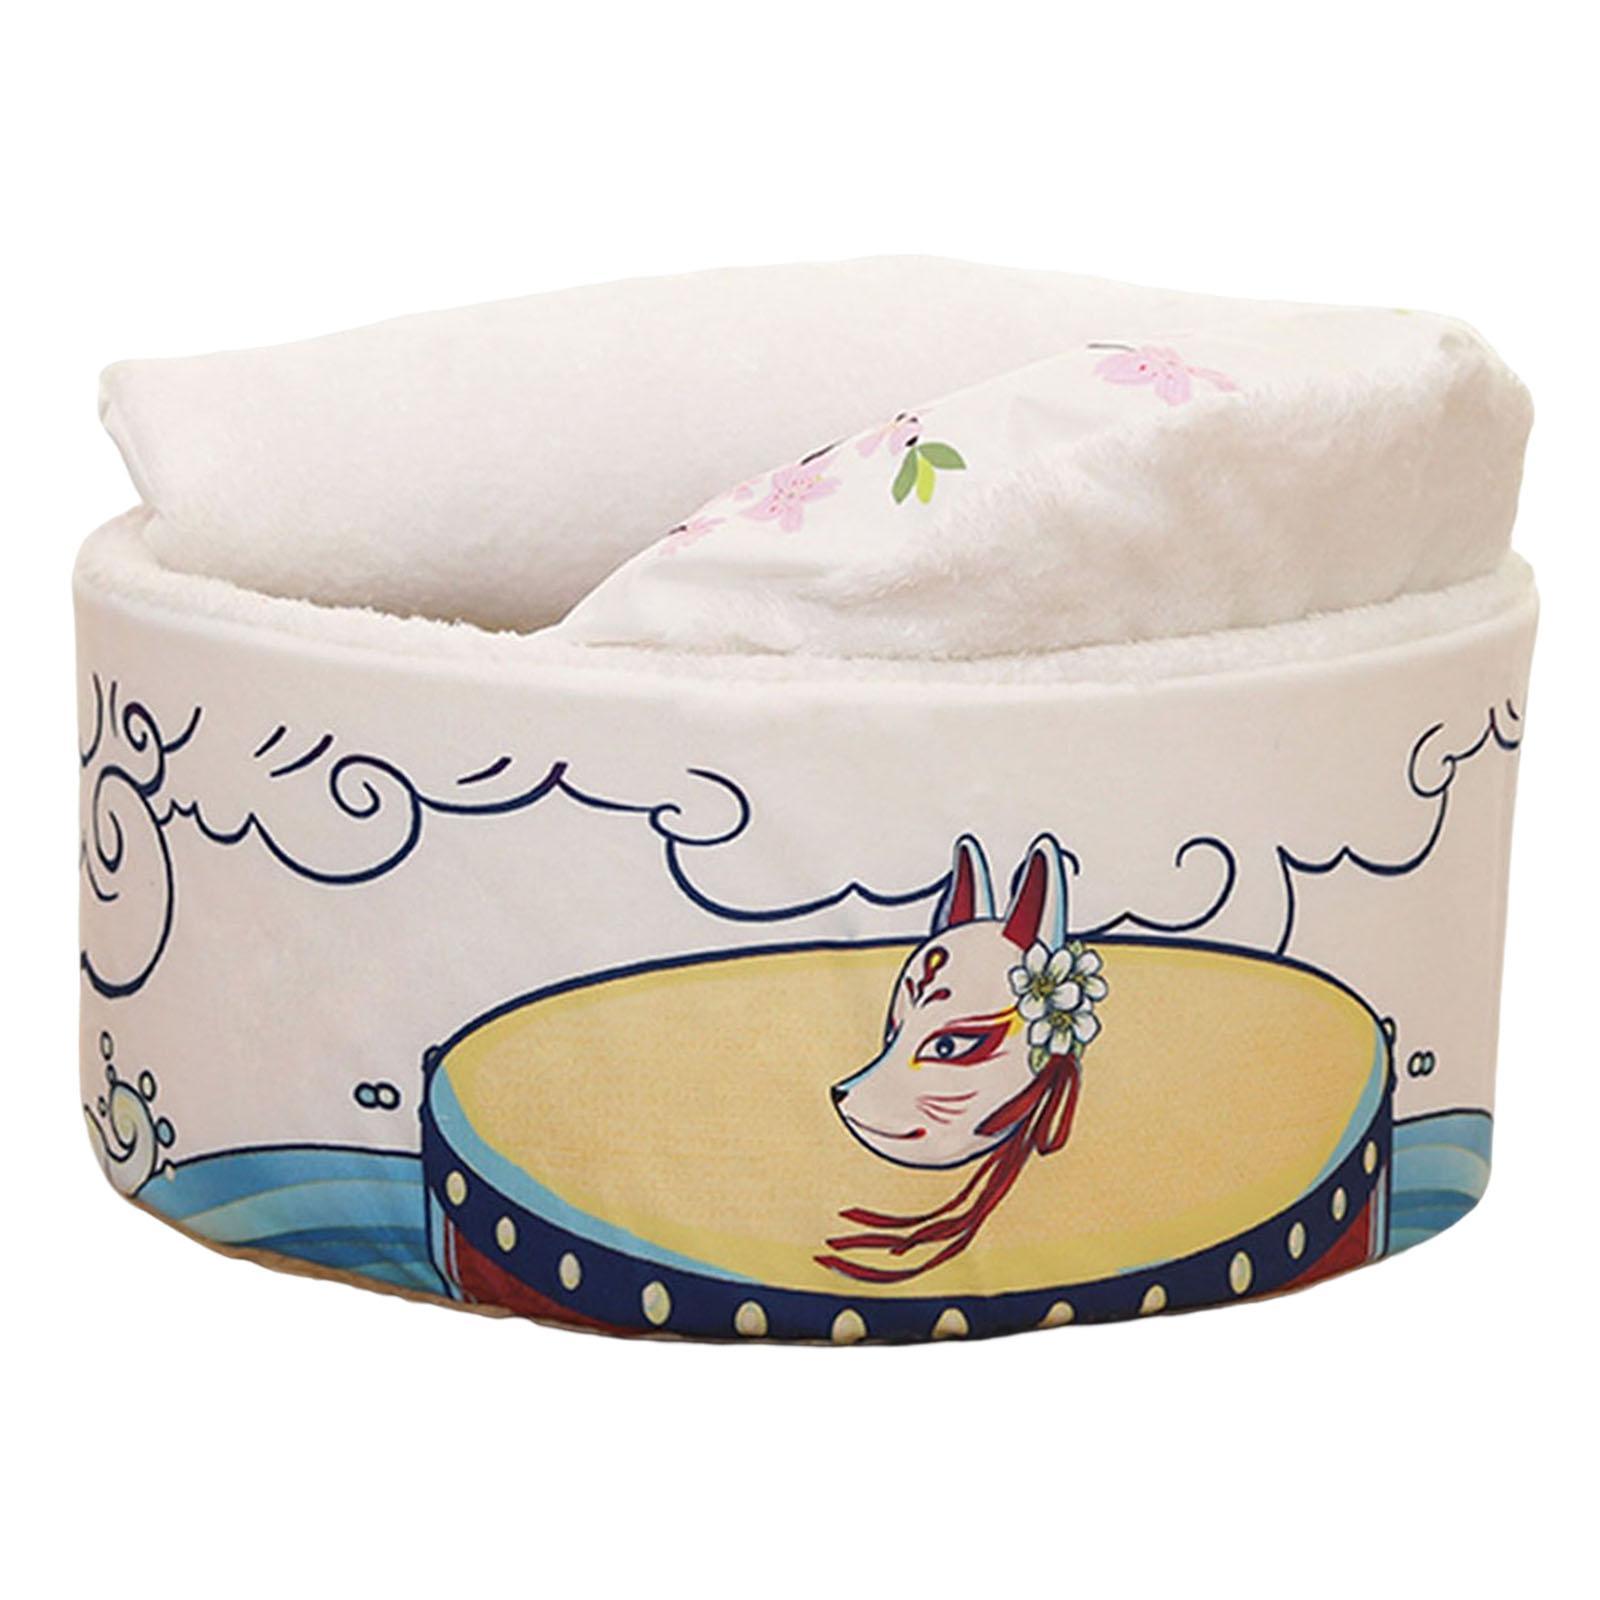 Cave House Cozy Dog Bed Kennel with Removable Washable Cushioned  Supplies Kitten Sleeping Bed Warm Nest Cat Beds for Indoor Cats